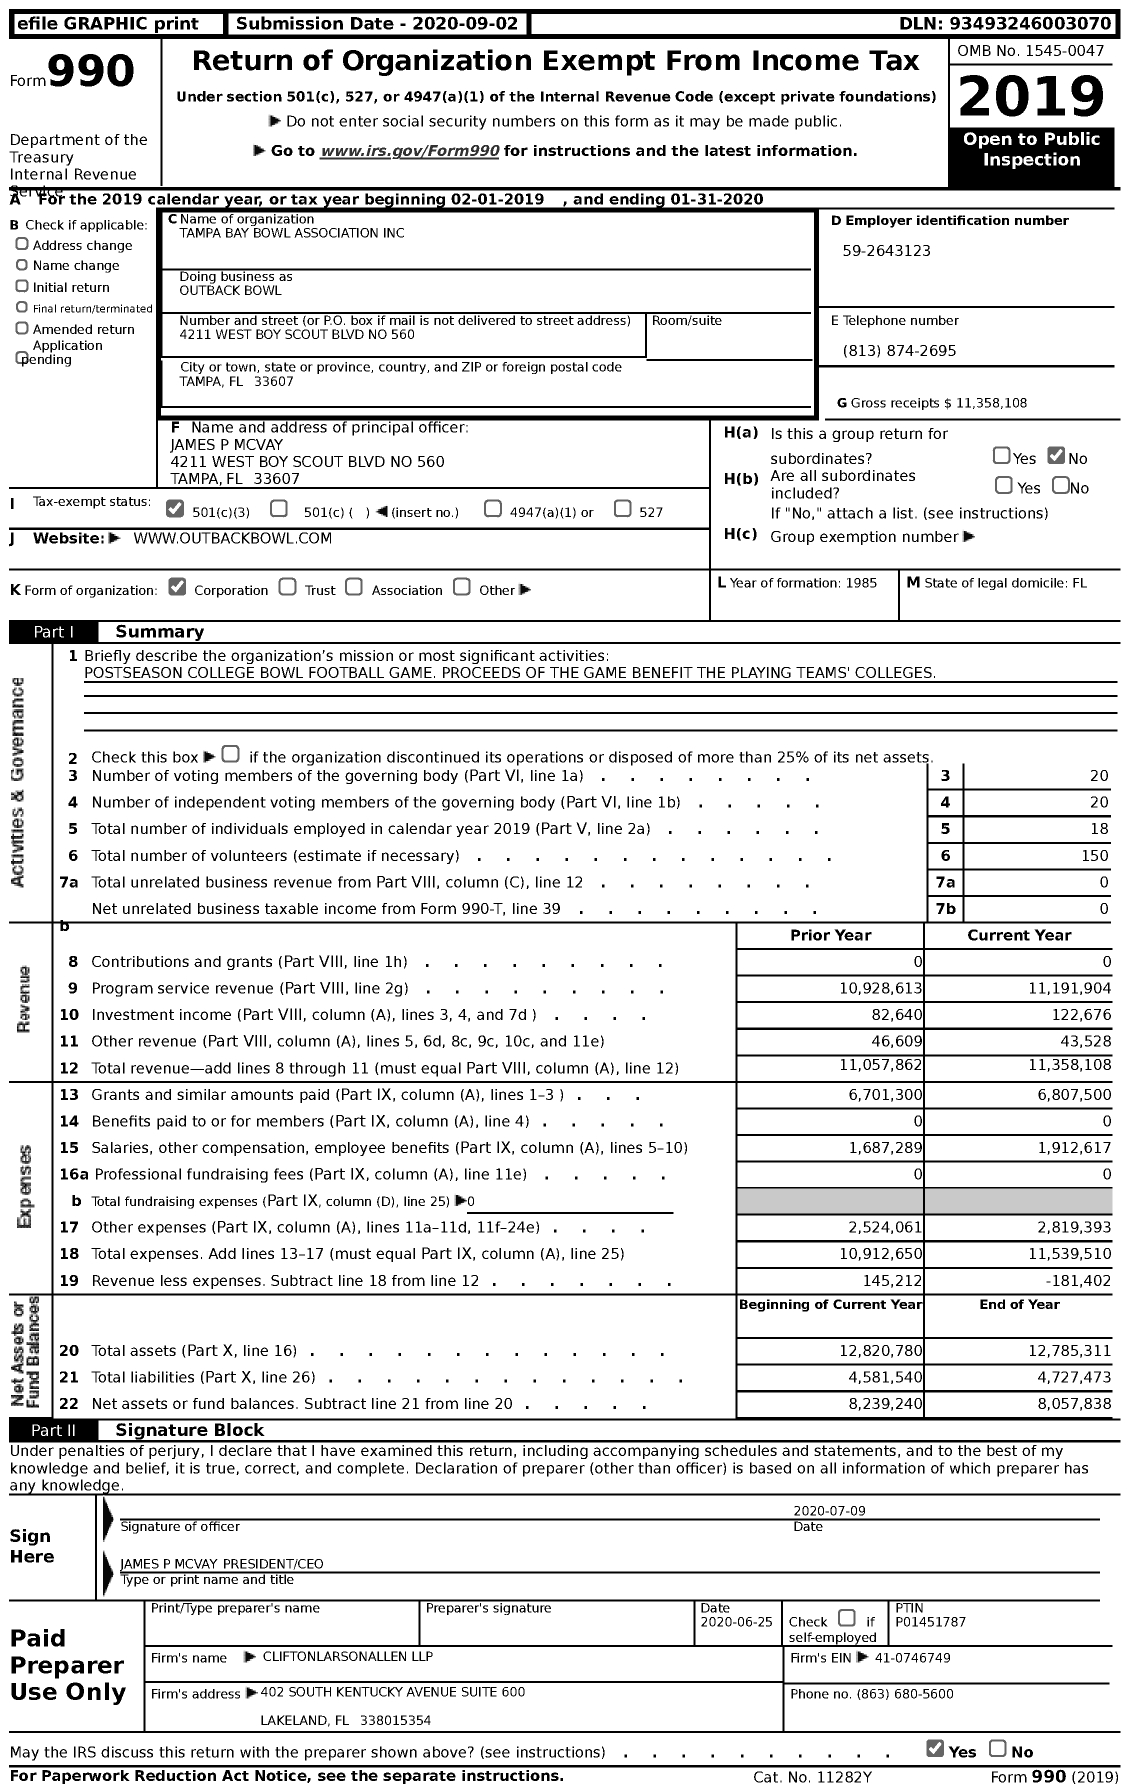 Image of first page of 2019 Form 990 for Reliaquest Bowl